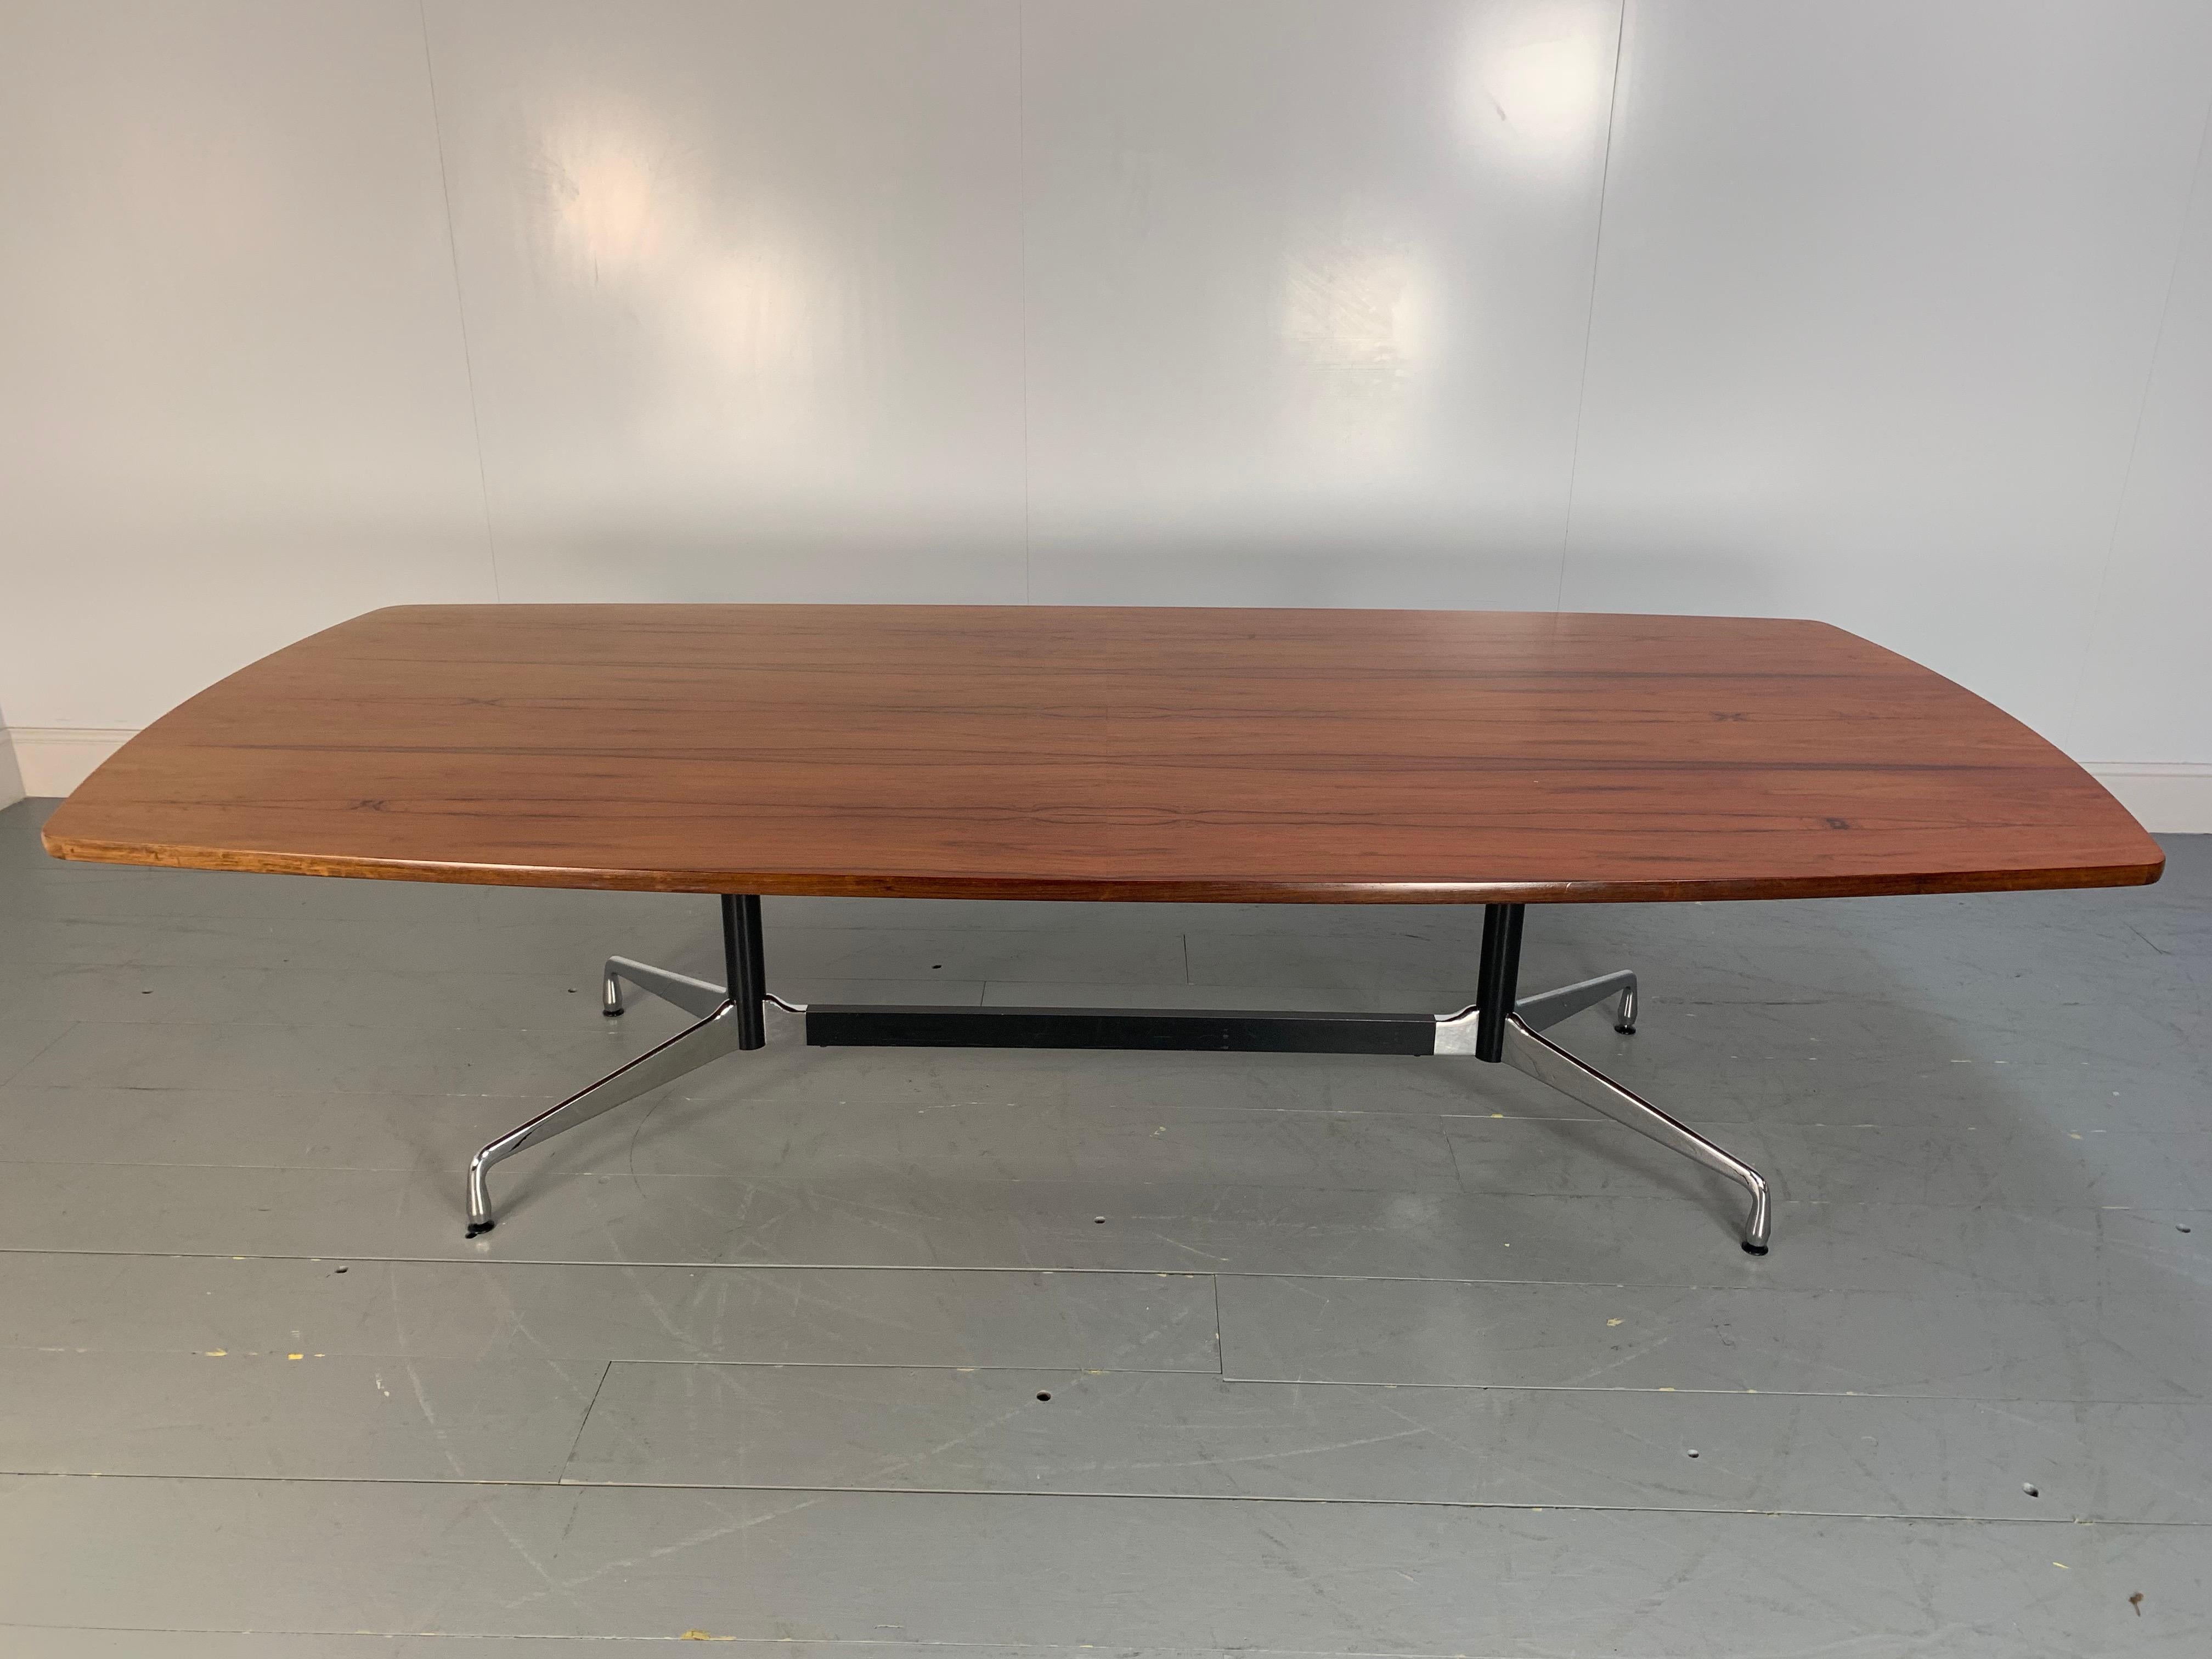 On offer on this occasion is a sublime, immaculately-presented Eames 